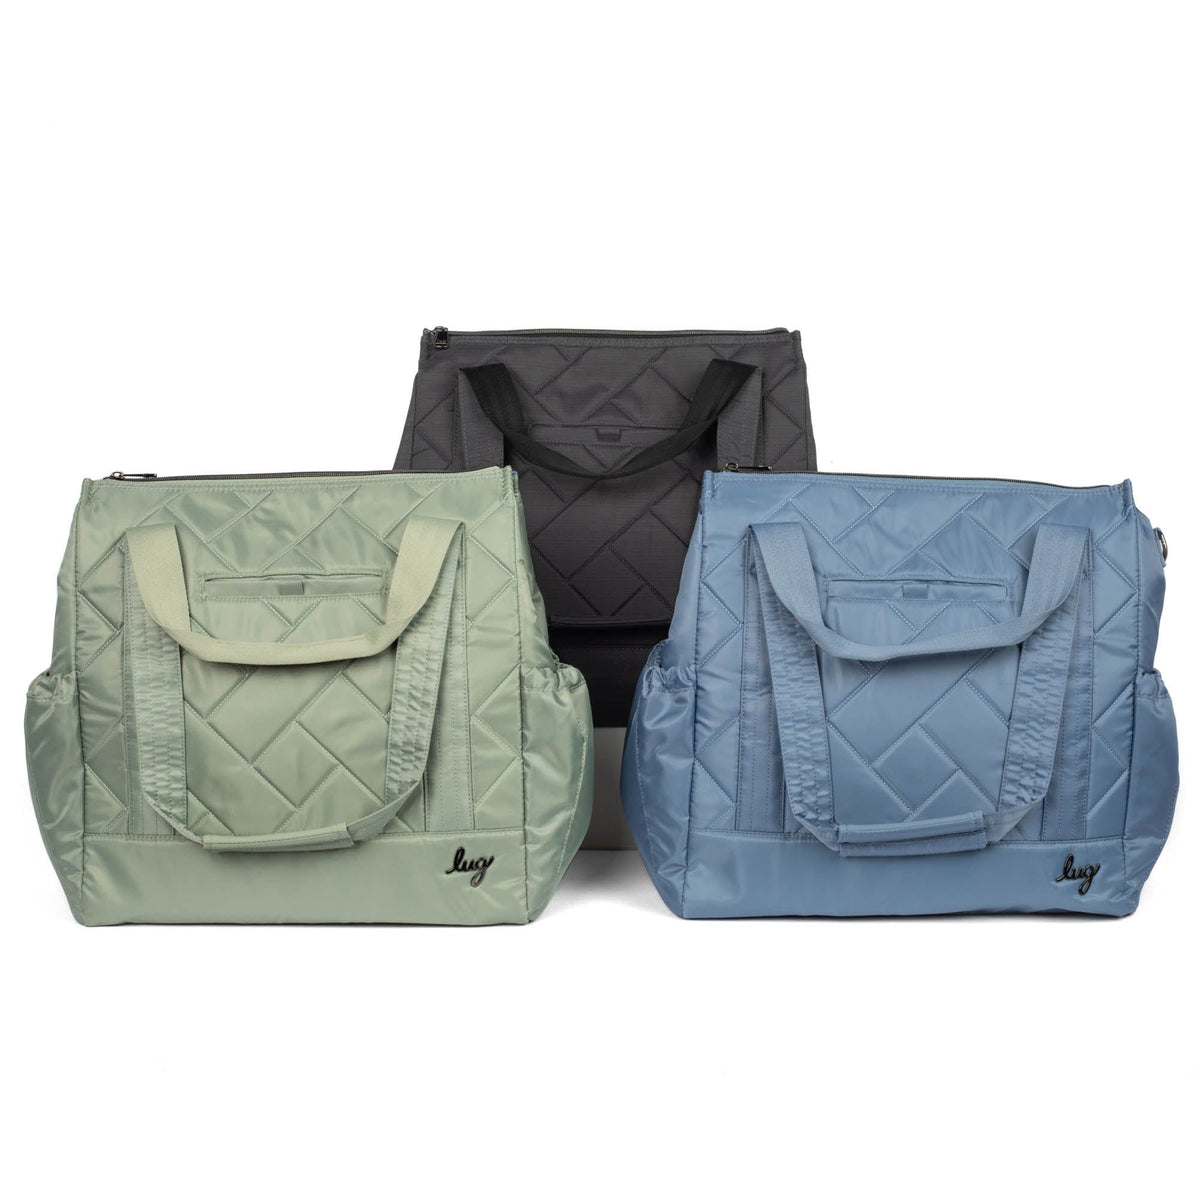 Yacht Carry-All Tote 